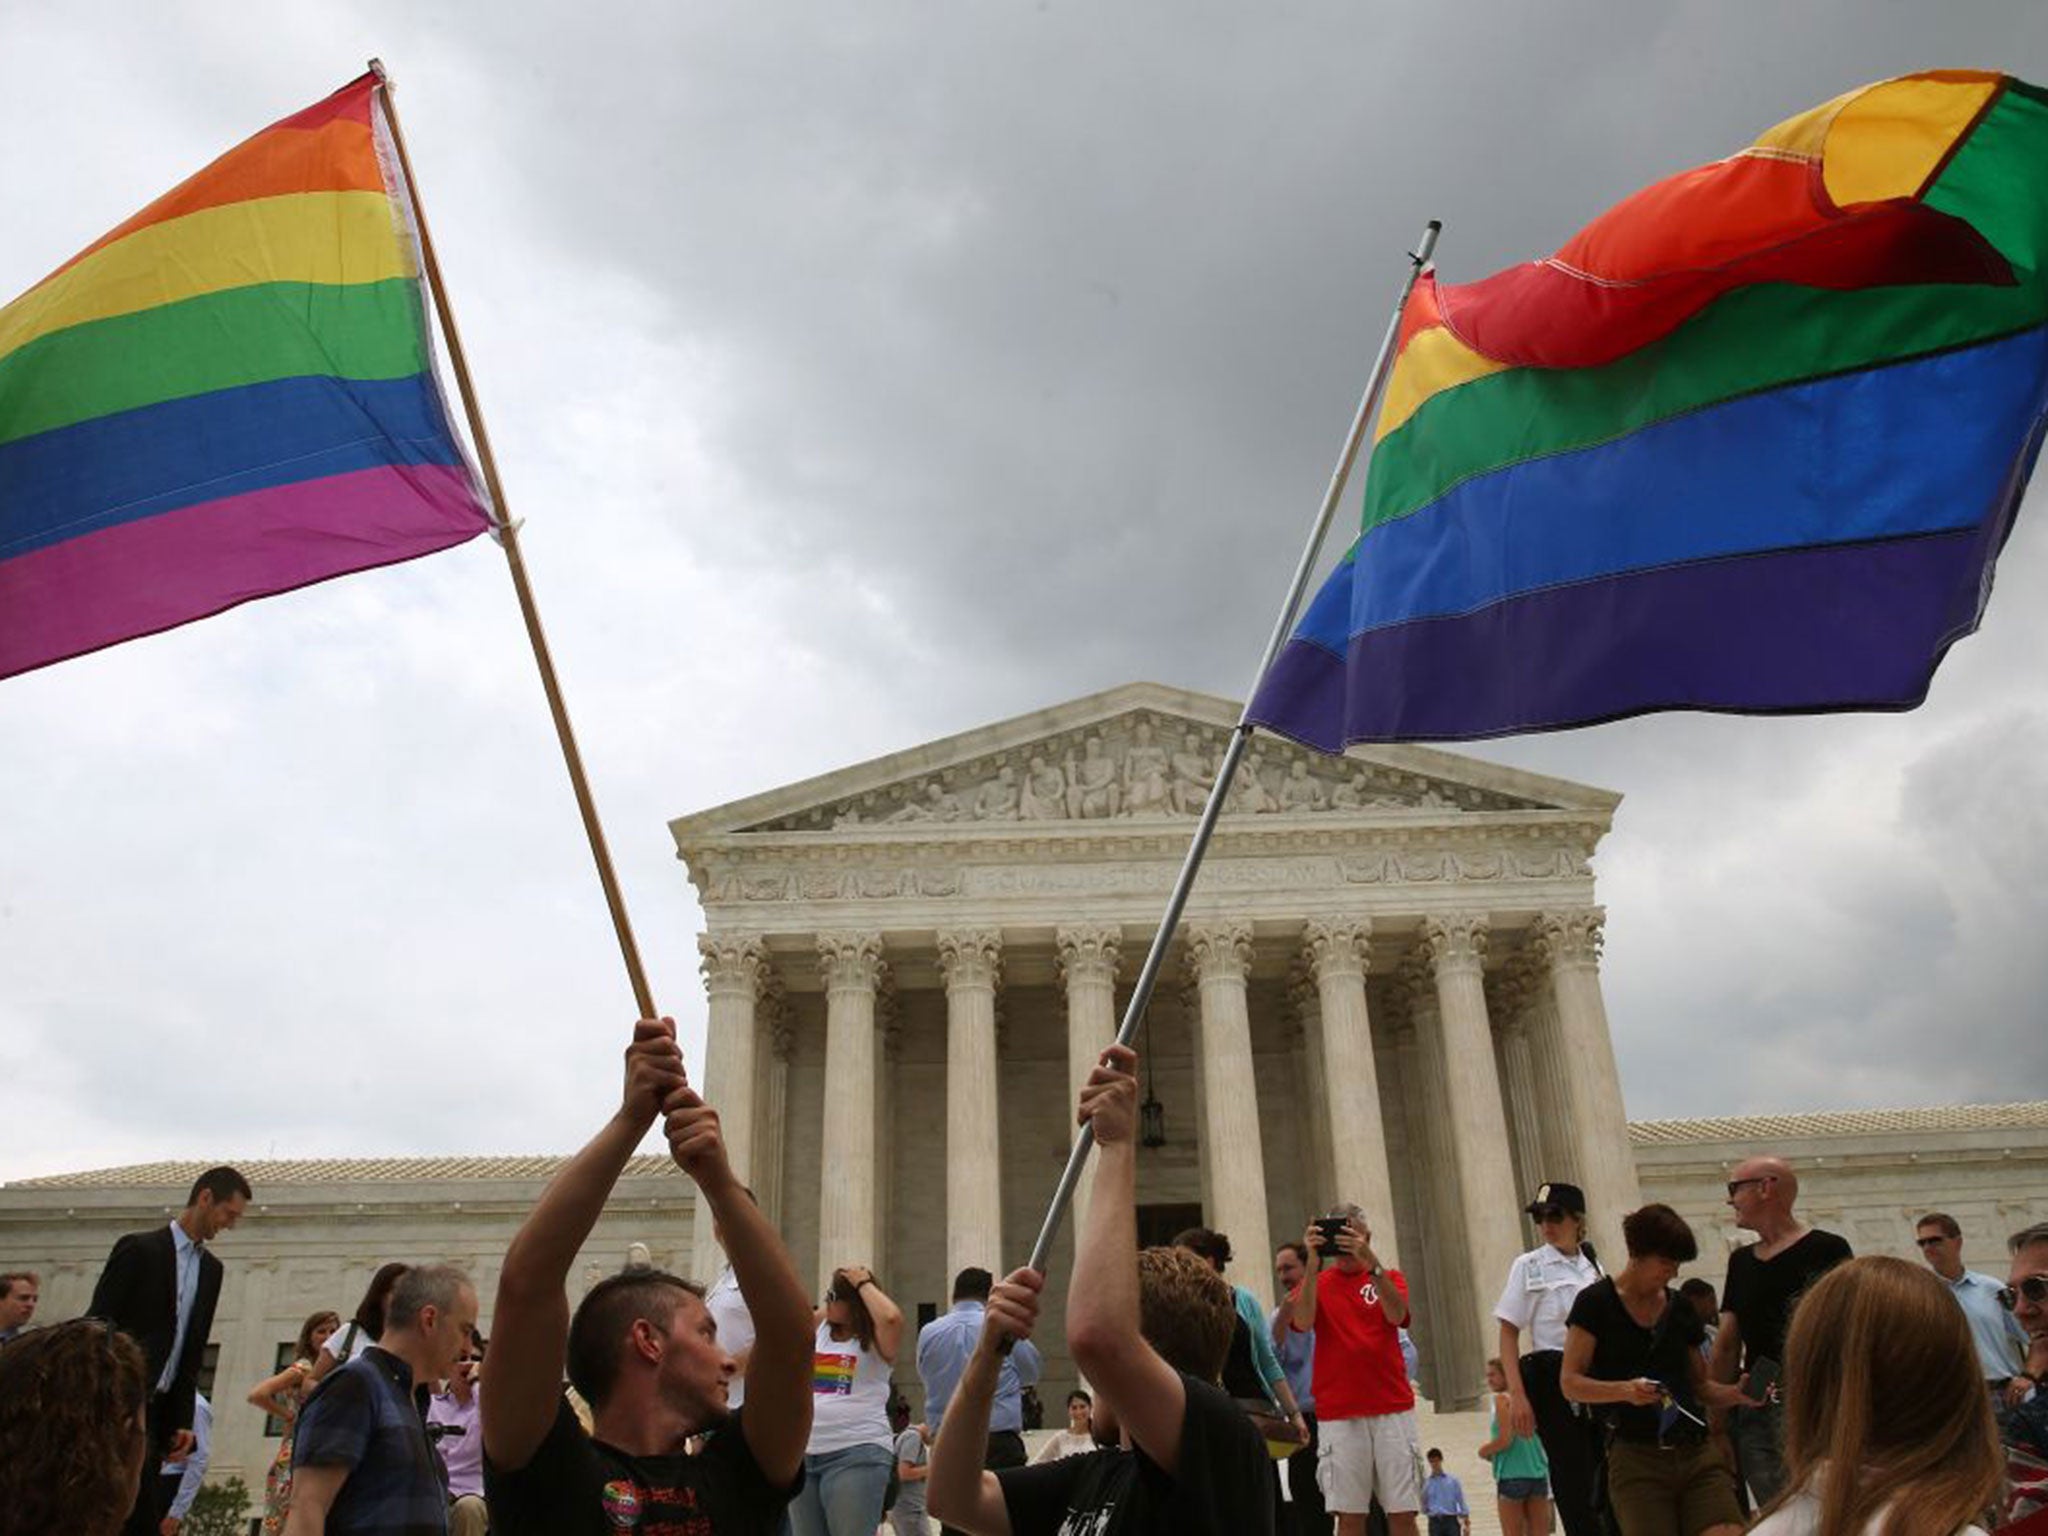 People celebrate in front of the U.S. Supreme Court after the ruling in favor of same-sex marriage June 26, 2015 in Washington, DC